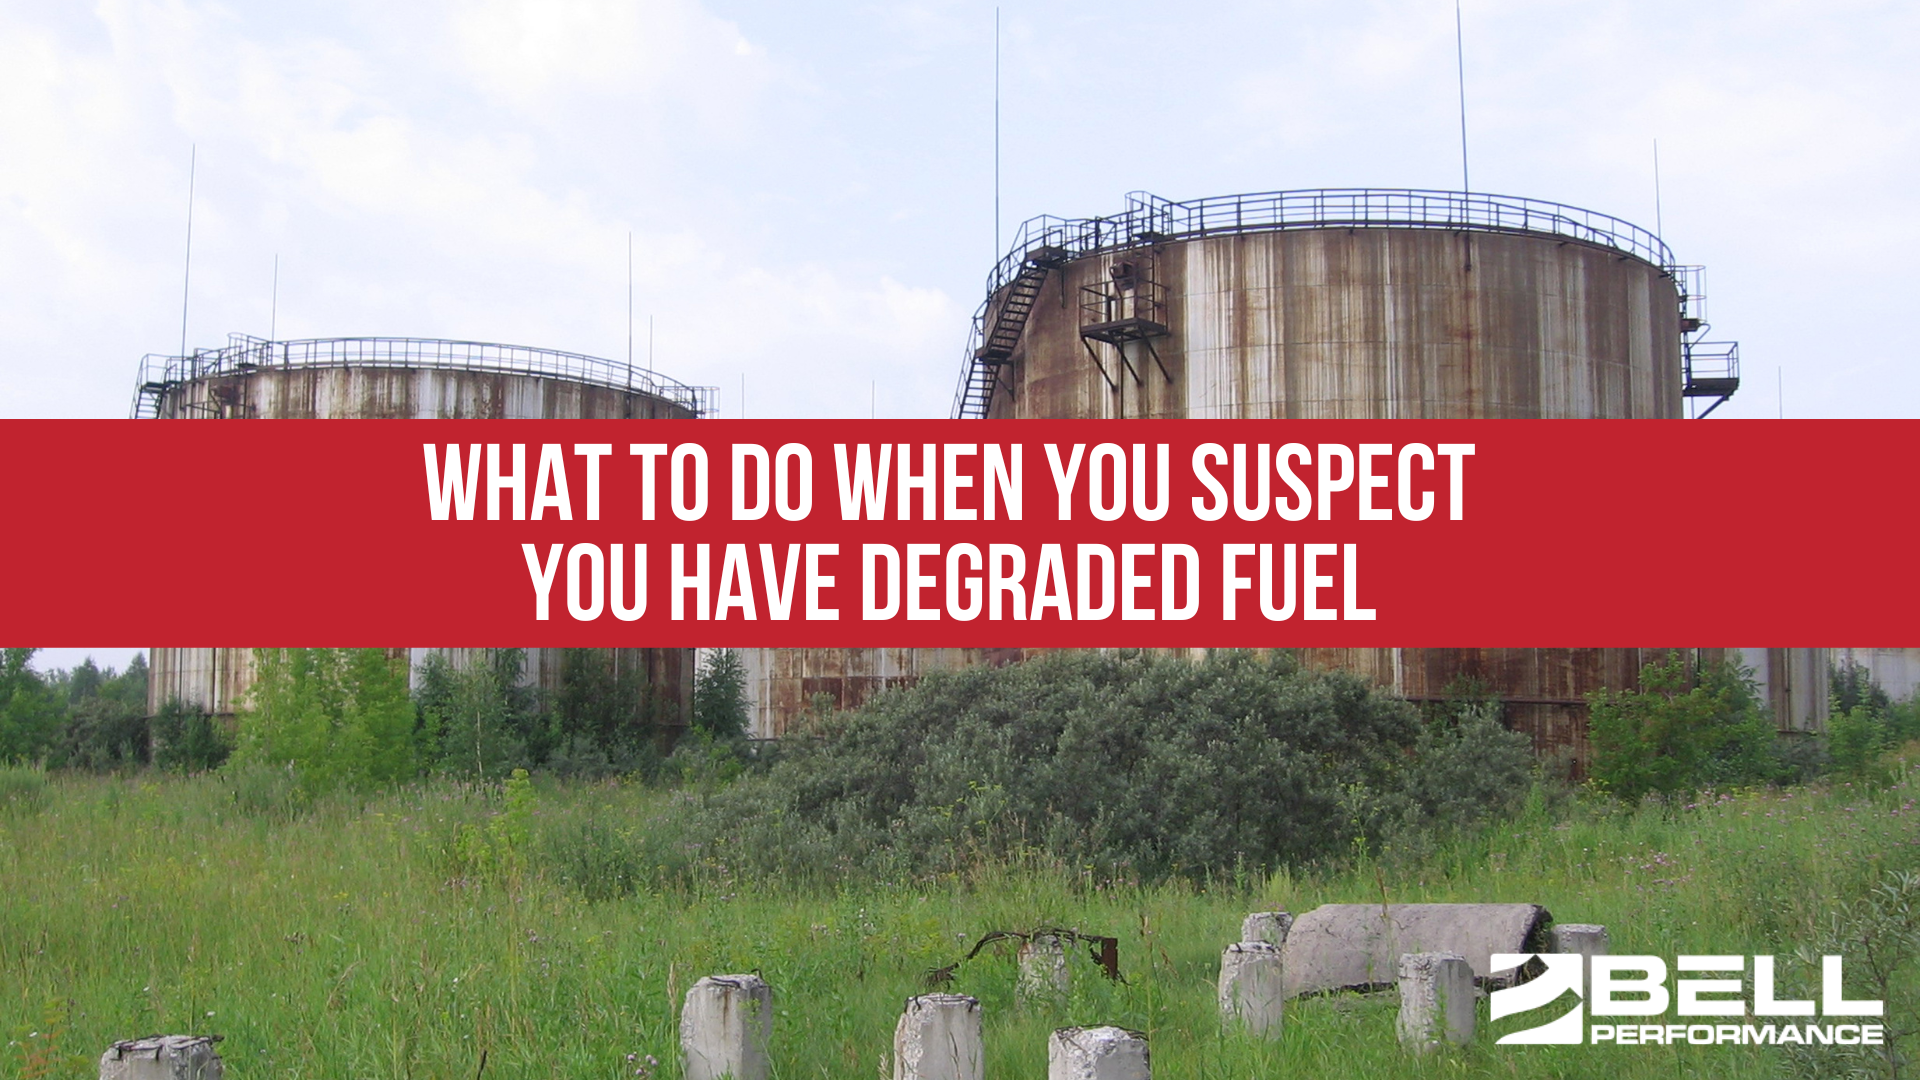 What To Do When You Suspect You Have Degraded Fuel